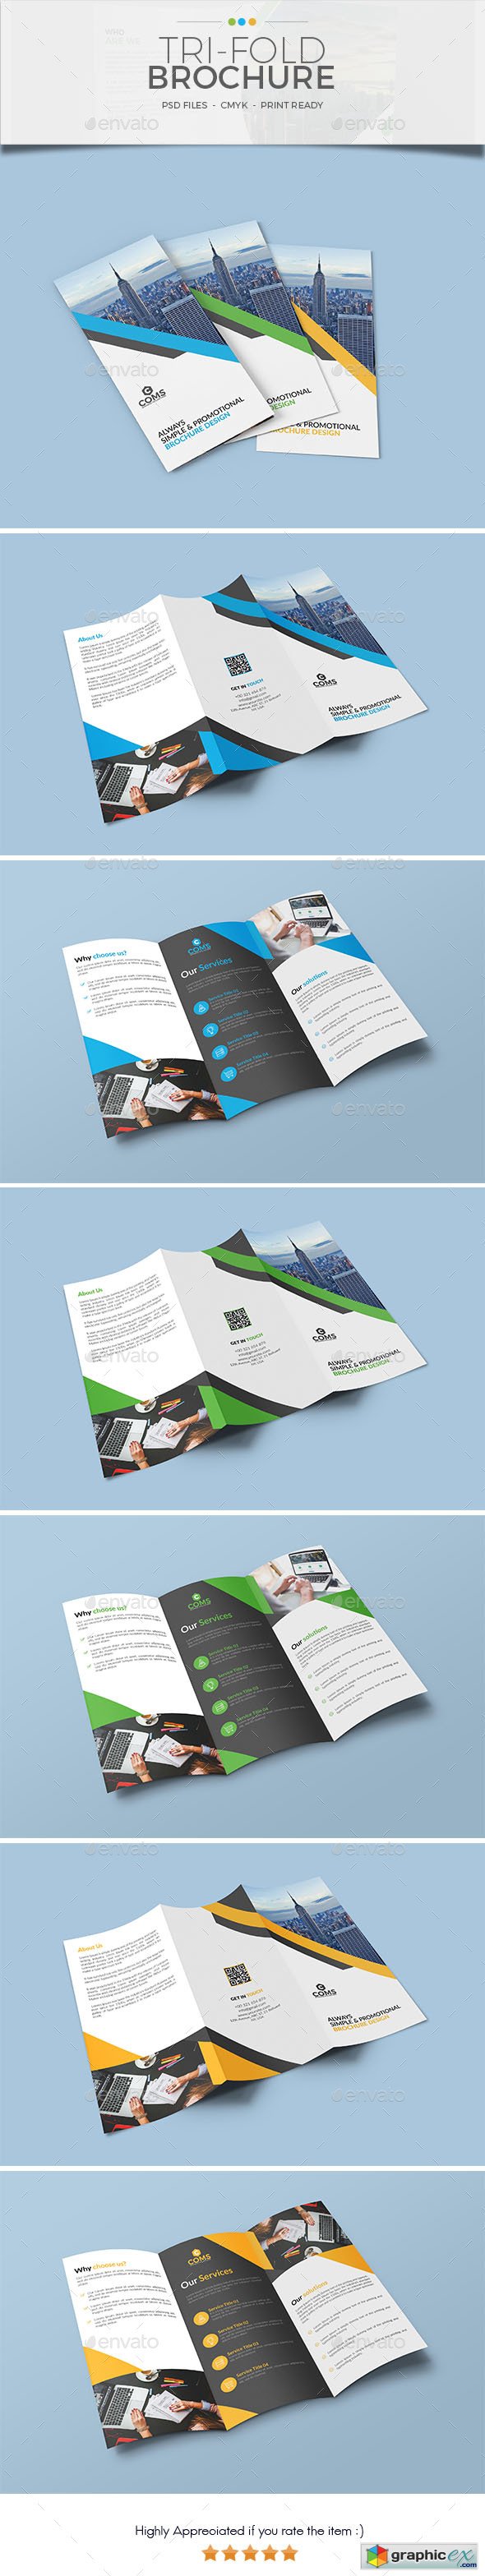 Trifold Brochure Template 16